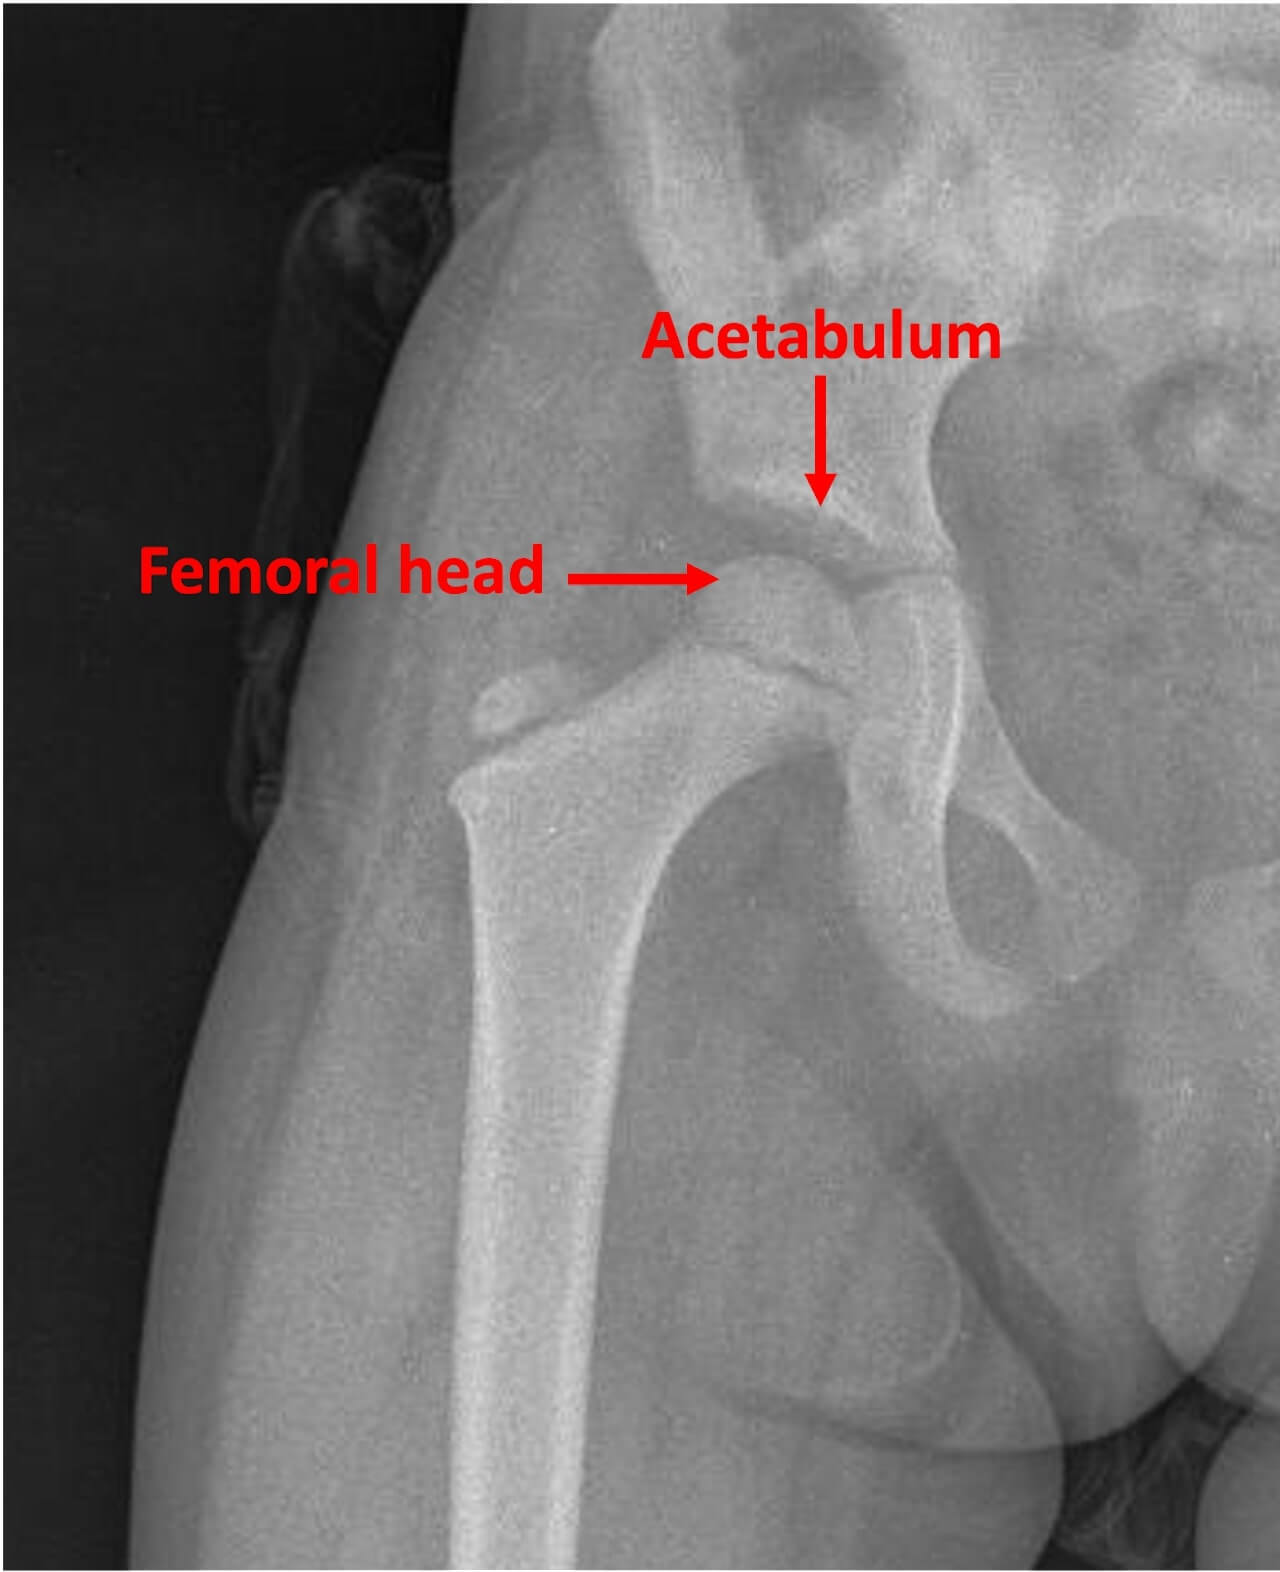 hip joint is a ball-and-socket joint